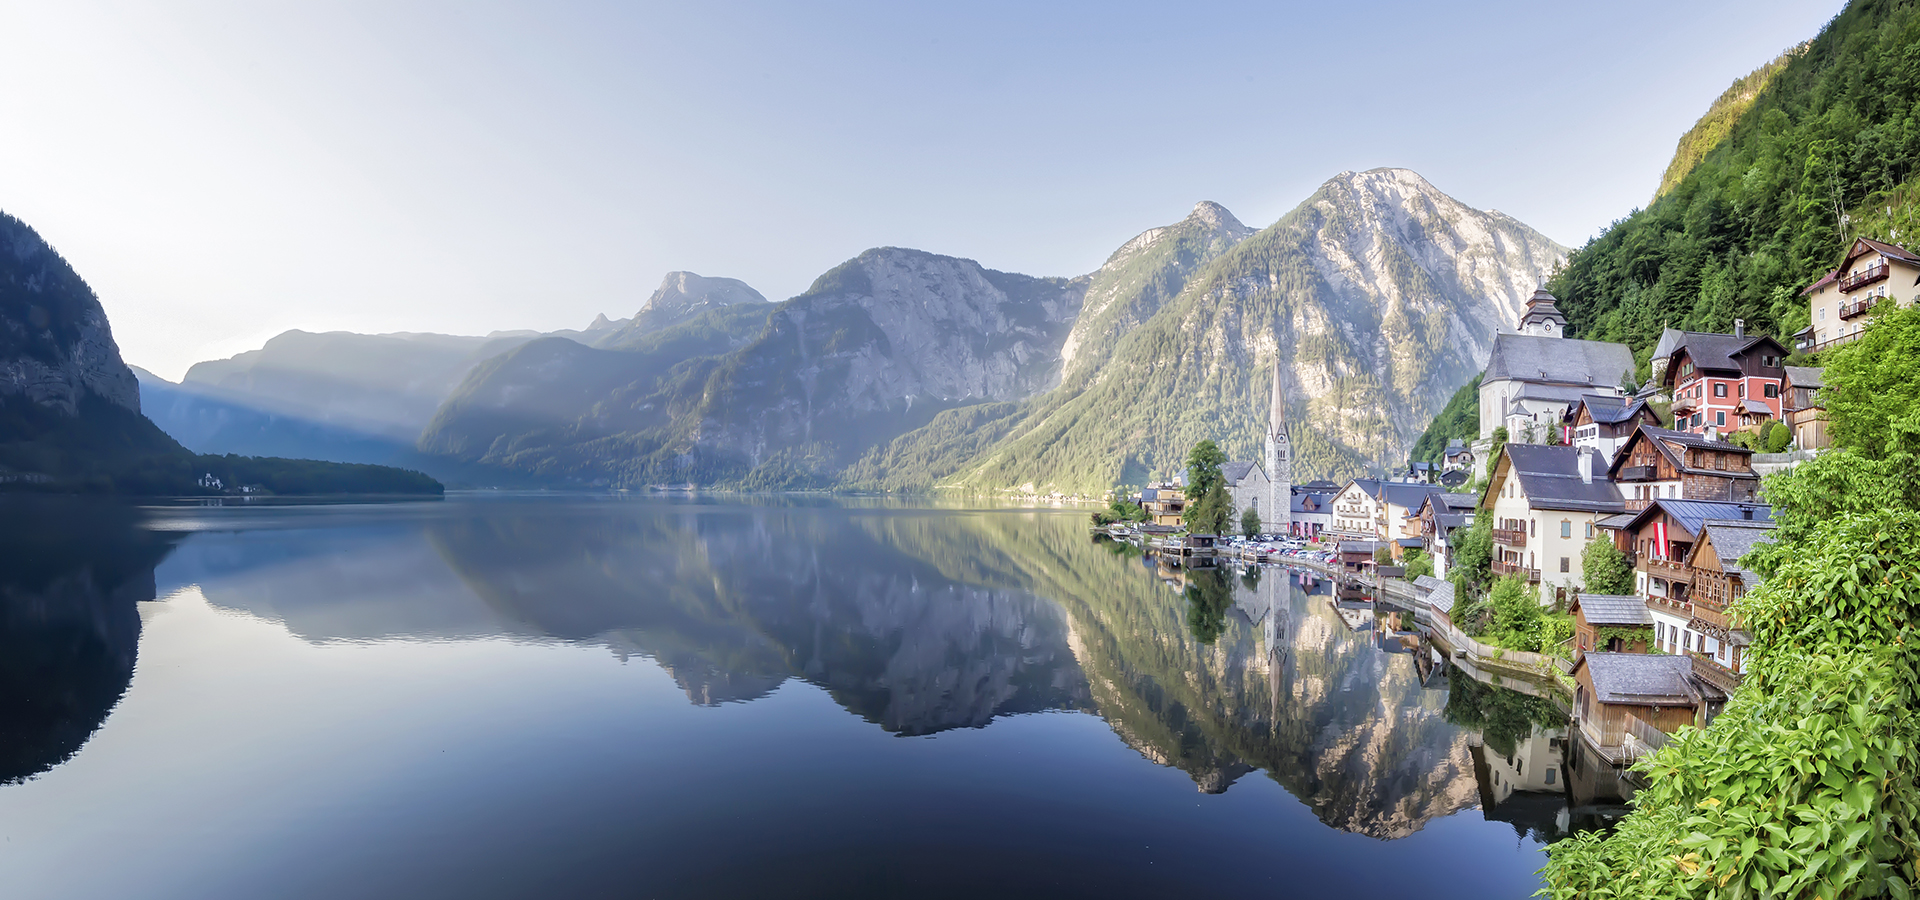 Travel Austria like an insider, with Mercure Local Stories